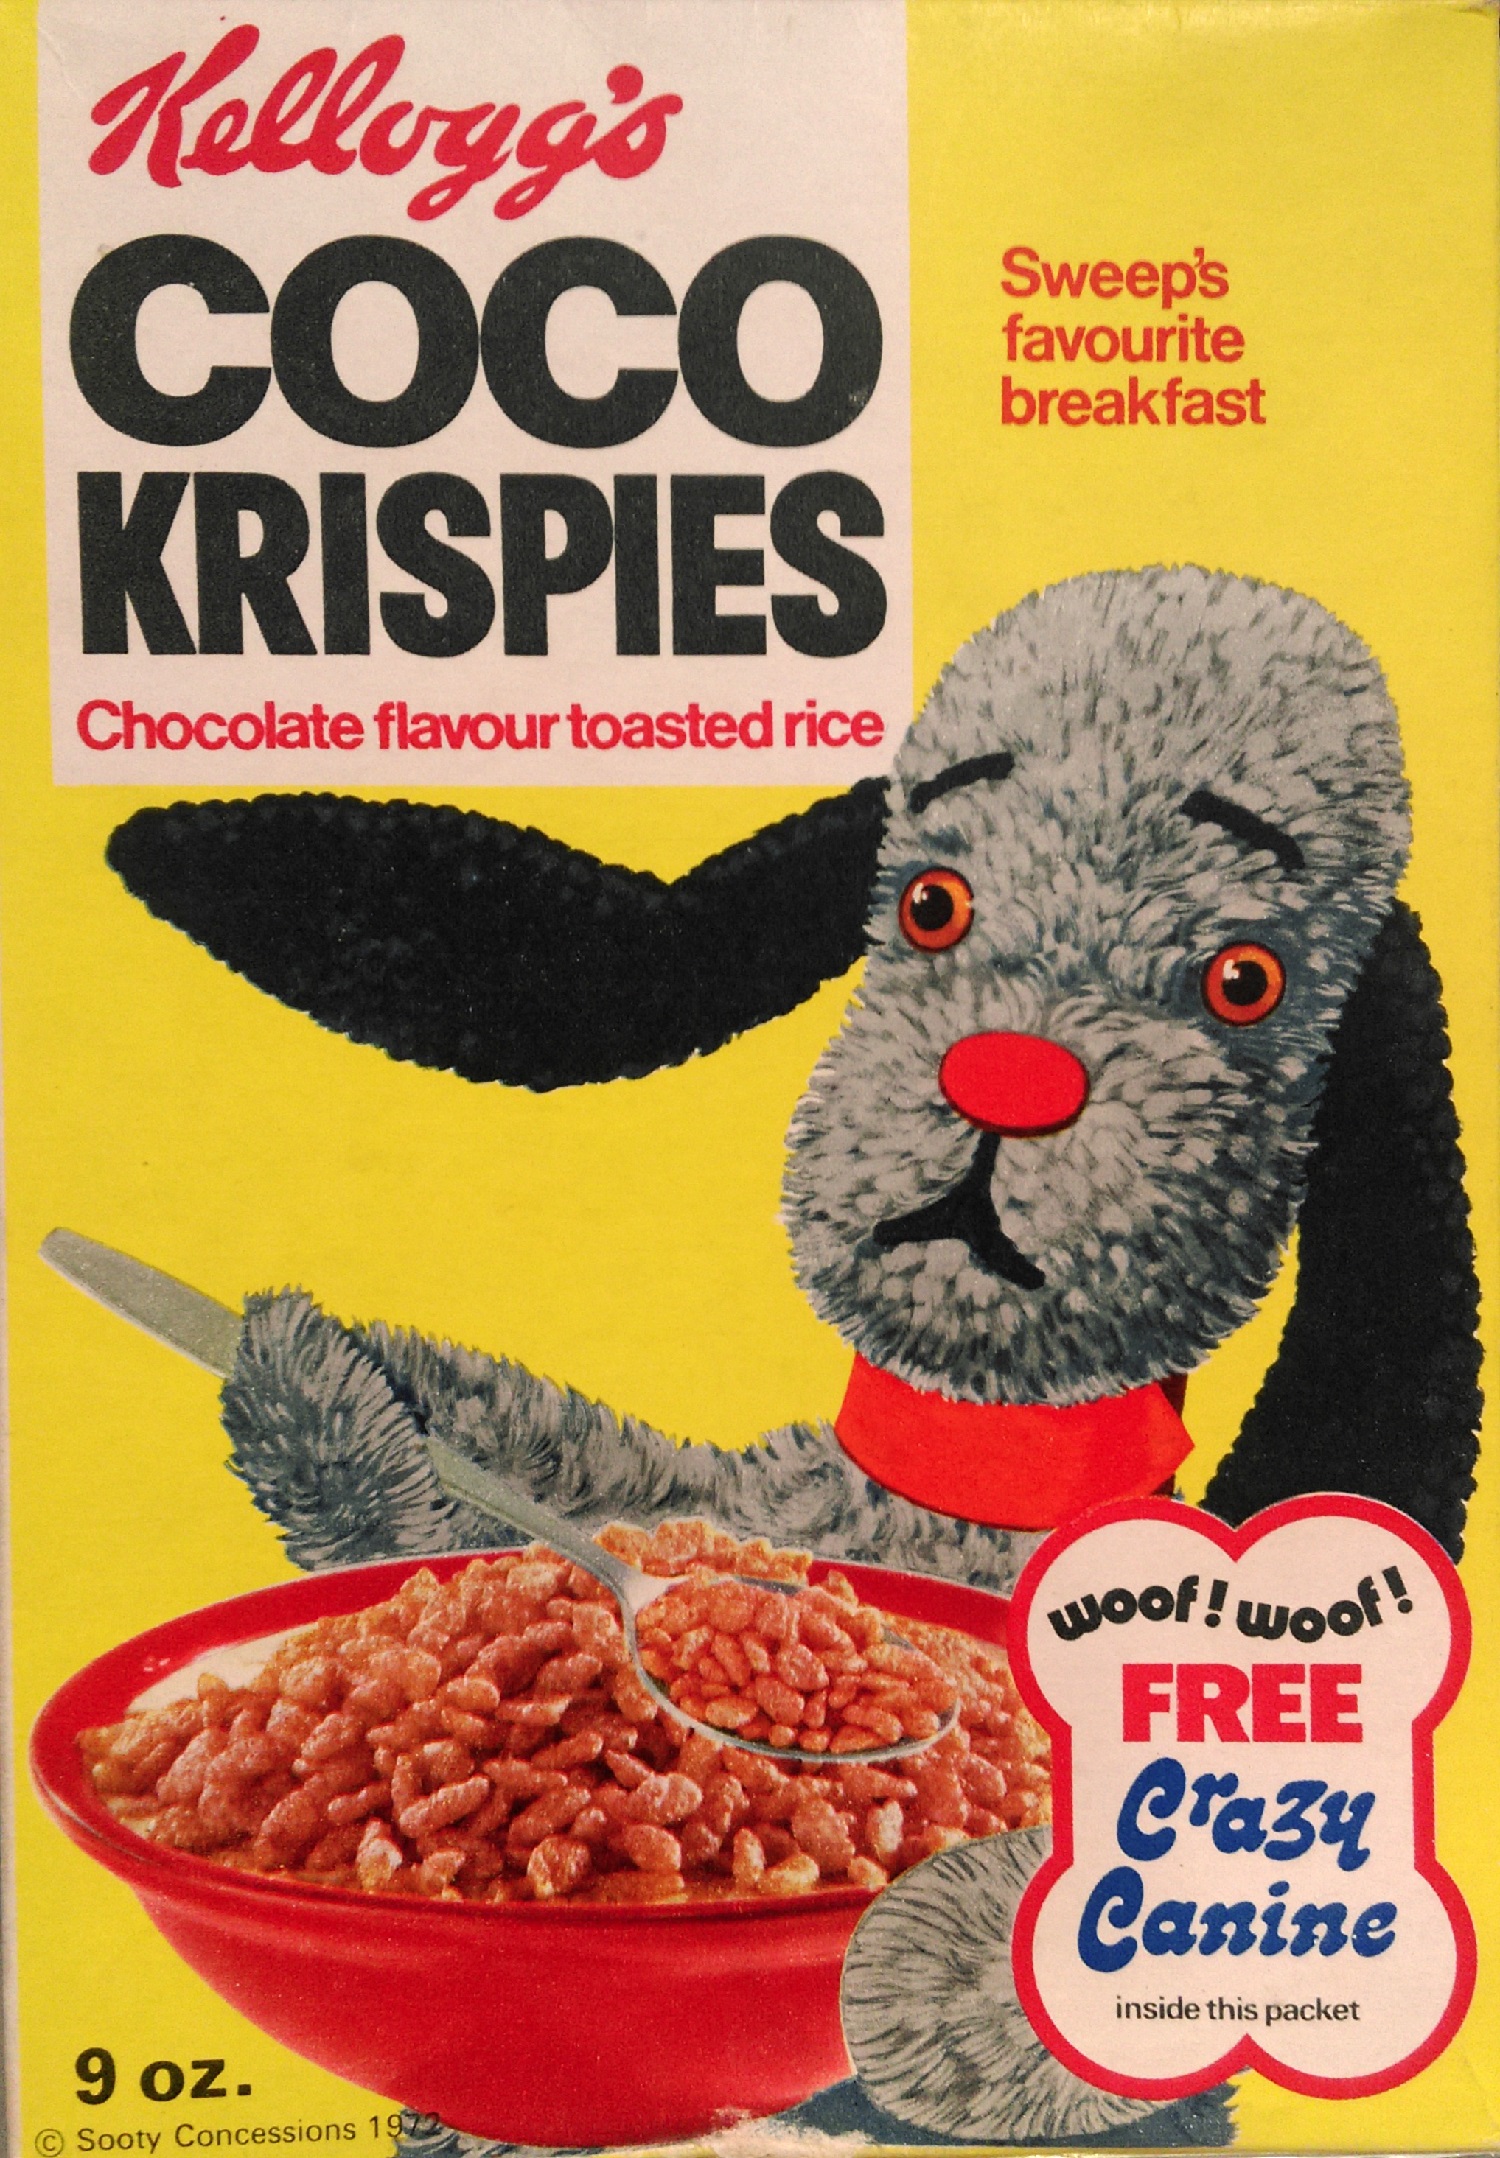 Kellog's Coco Krispies packet from 1972, with a picture of Sweep the poodle on the front. On the back is information about free 